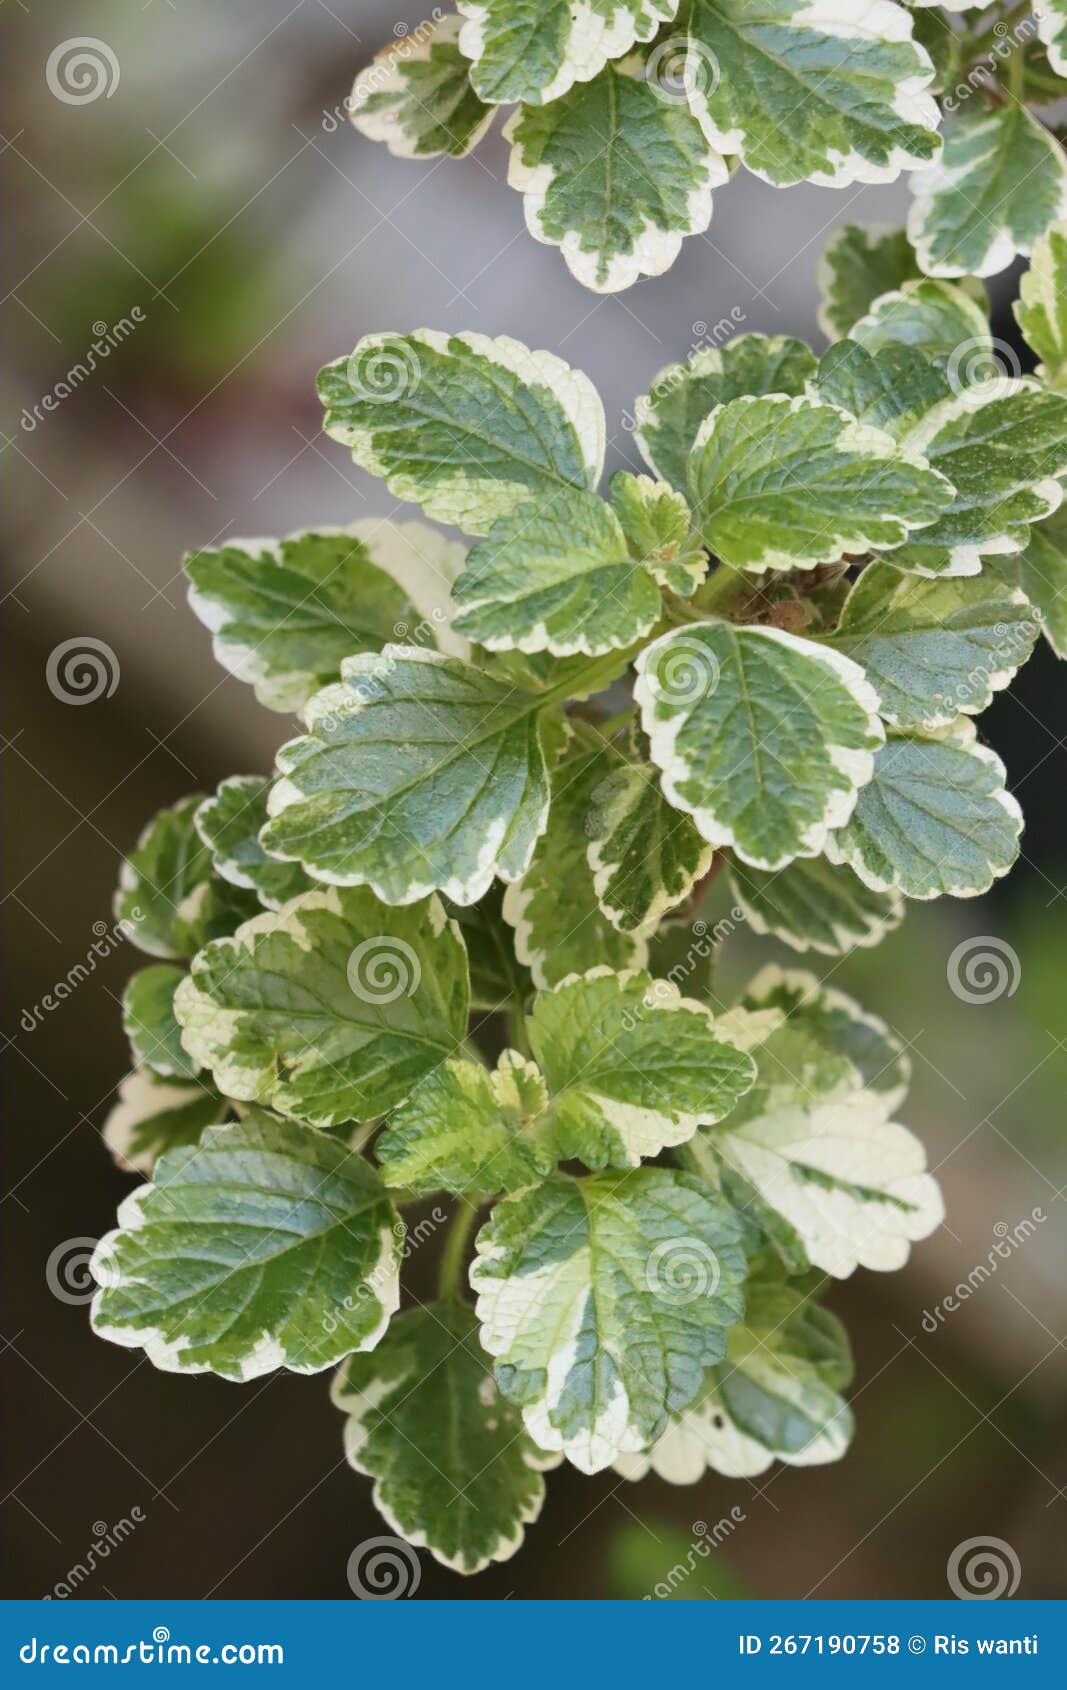 leaves photo. plectranthus coleoides. ornamental plant. falso incenso.